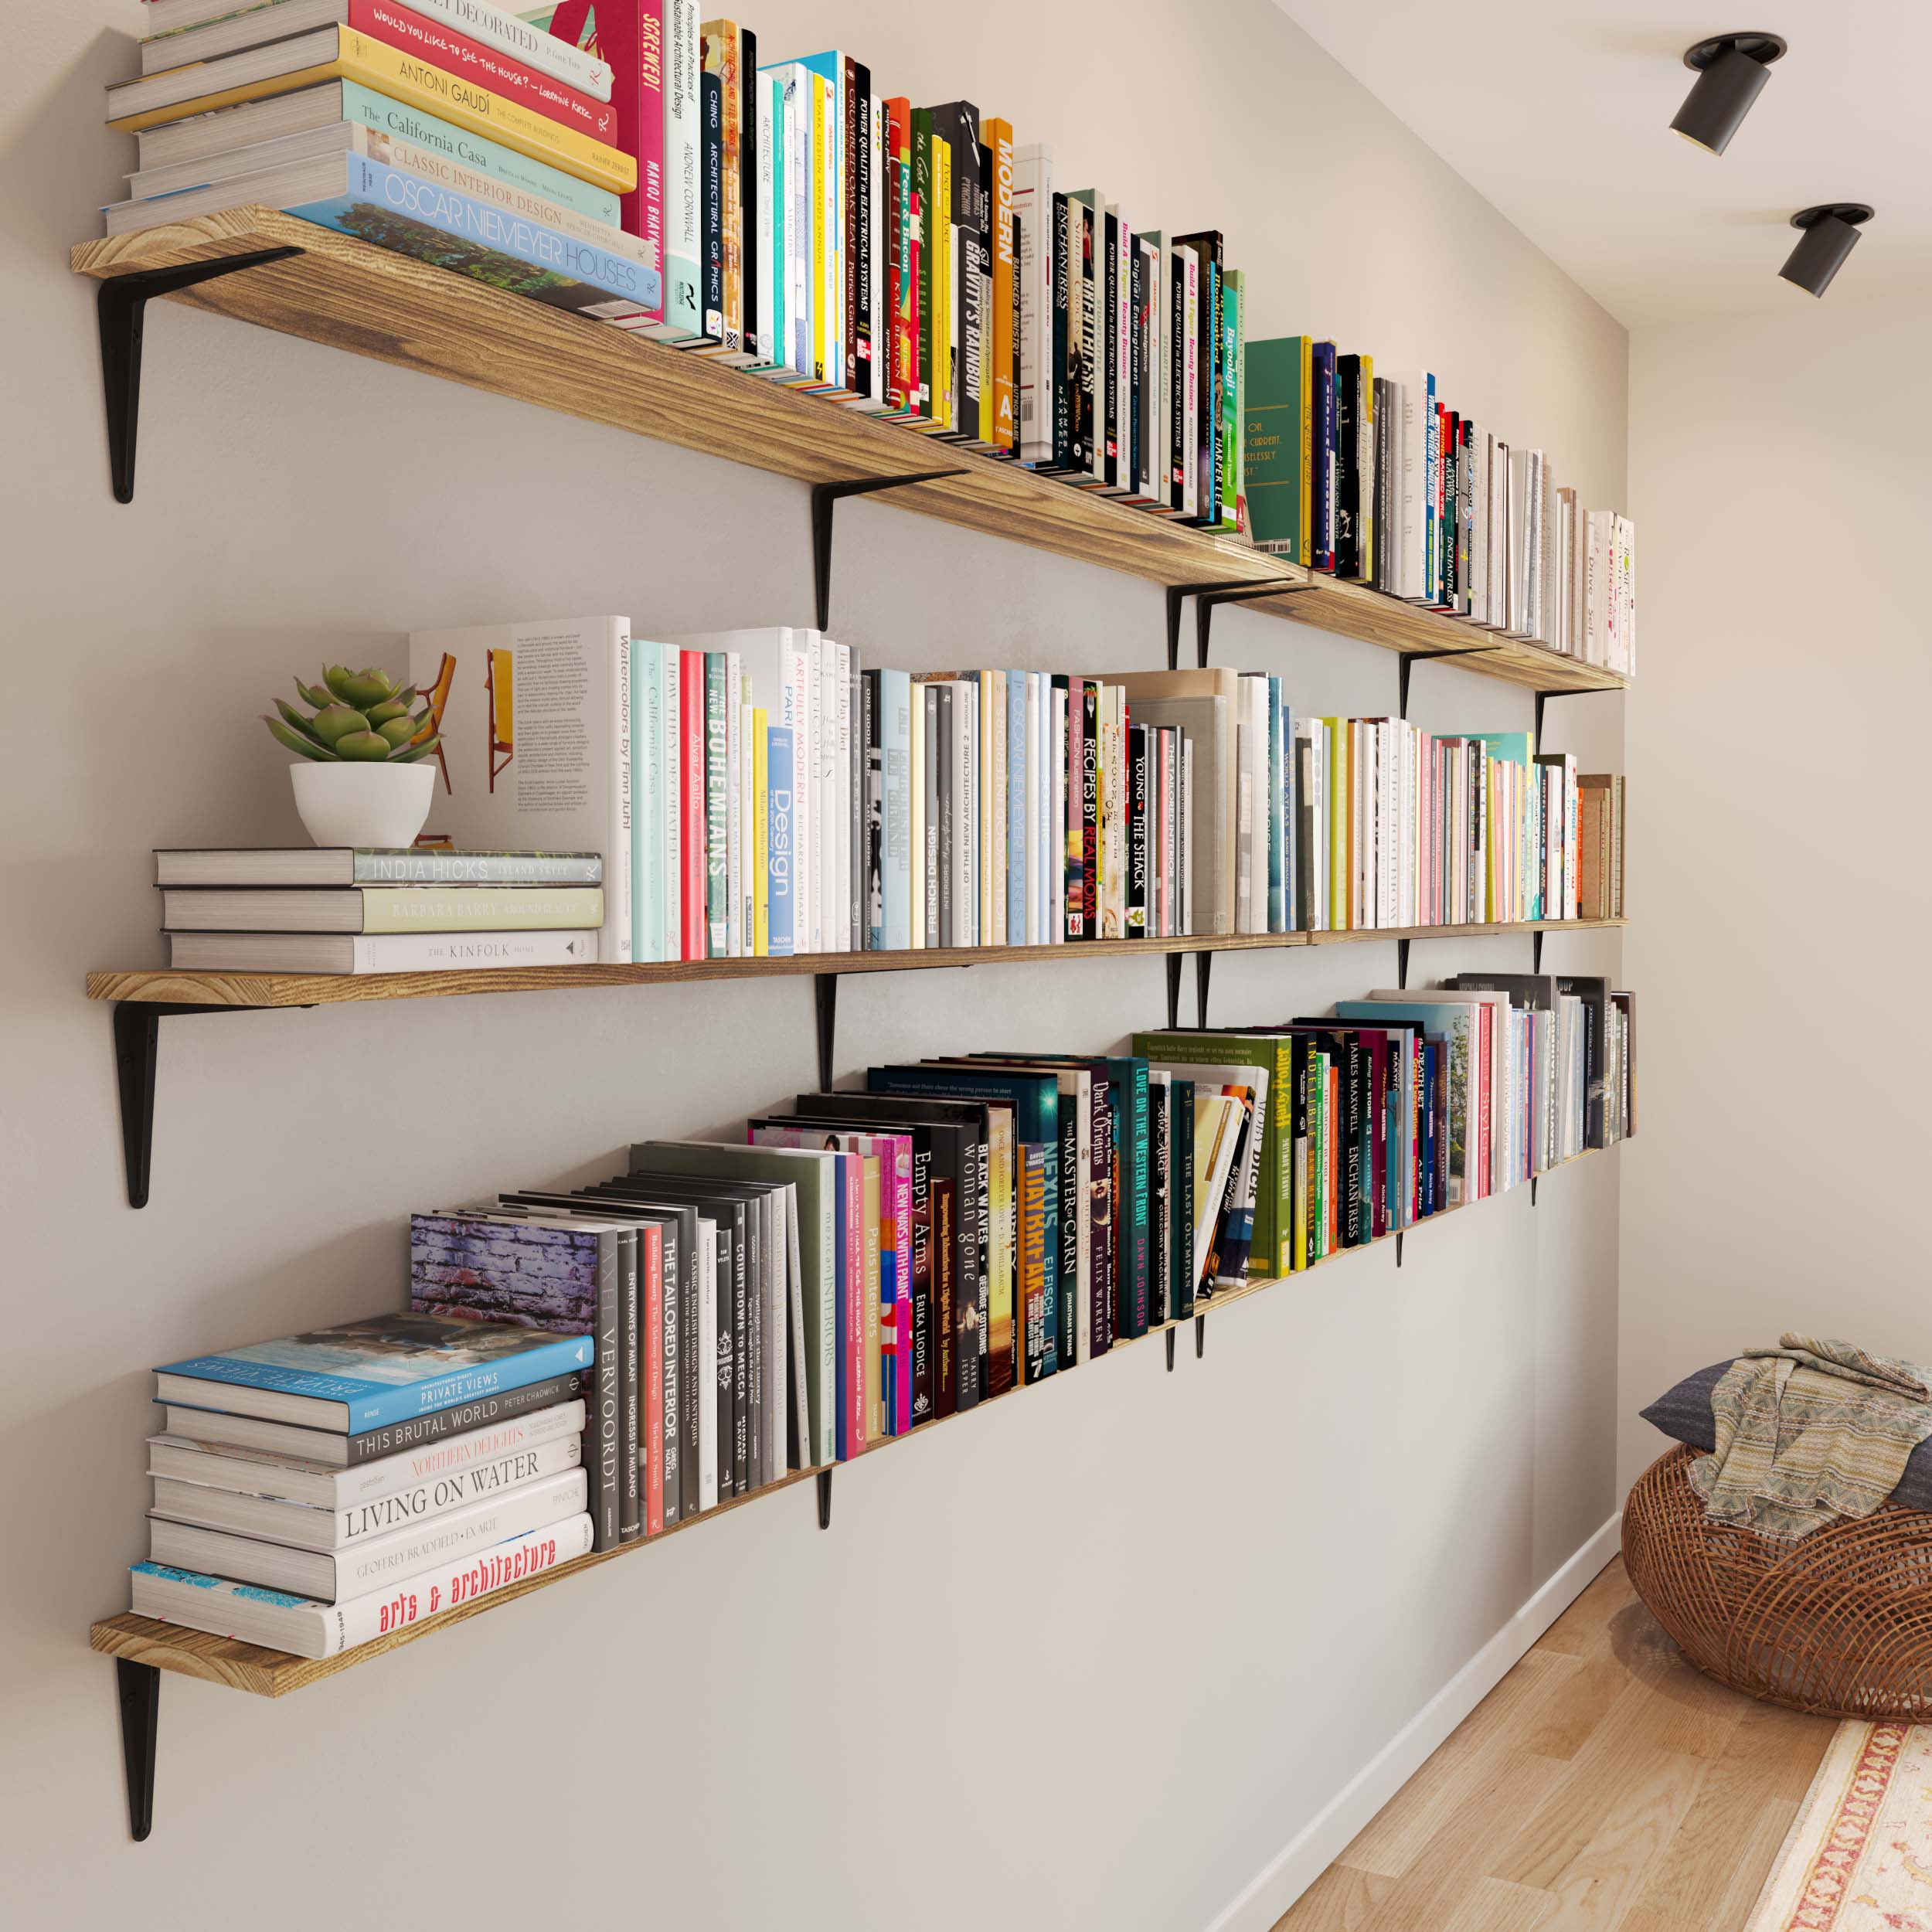 A long wall lined with rustic tall shelves filled with a colorful array of books, adding a lively touch to a minimalist room.